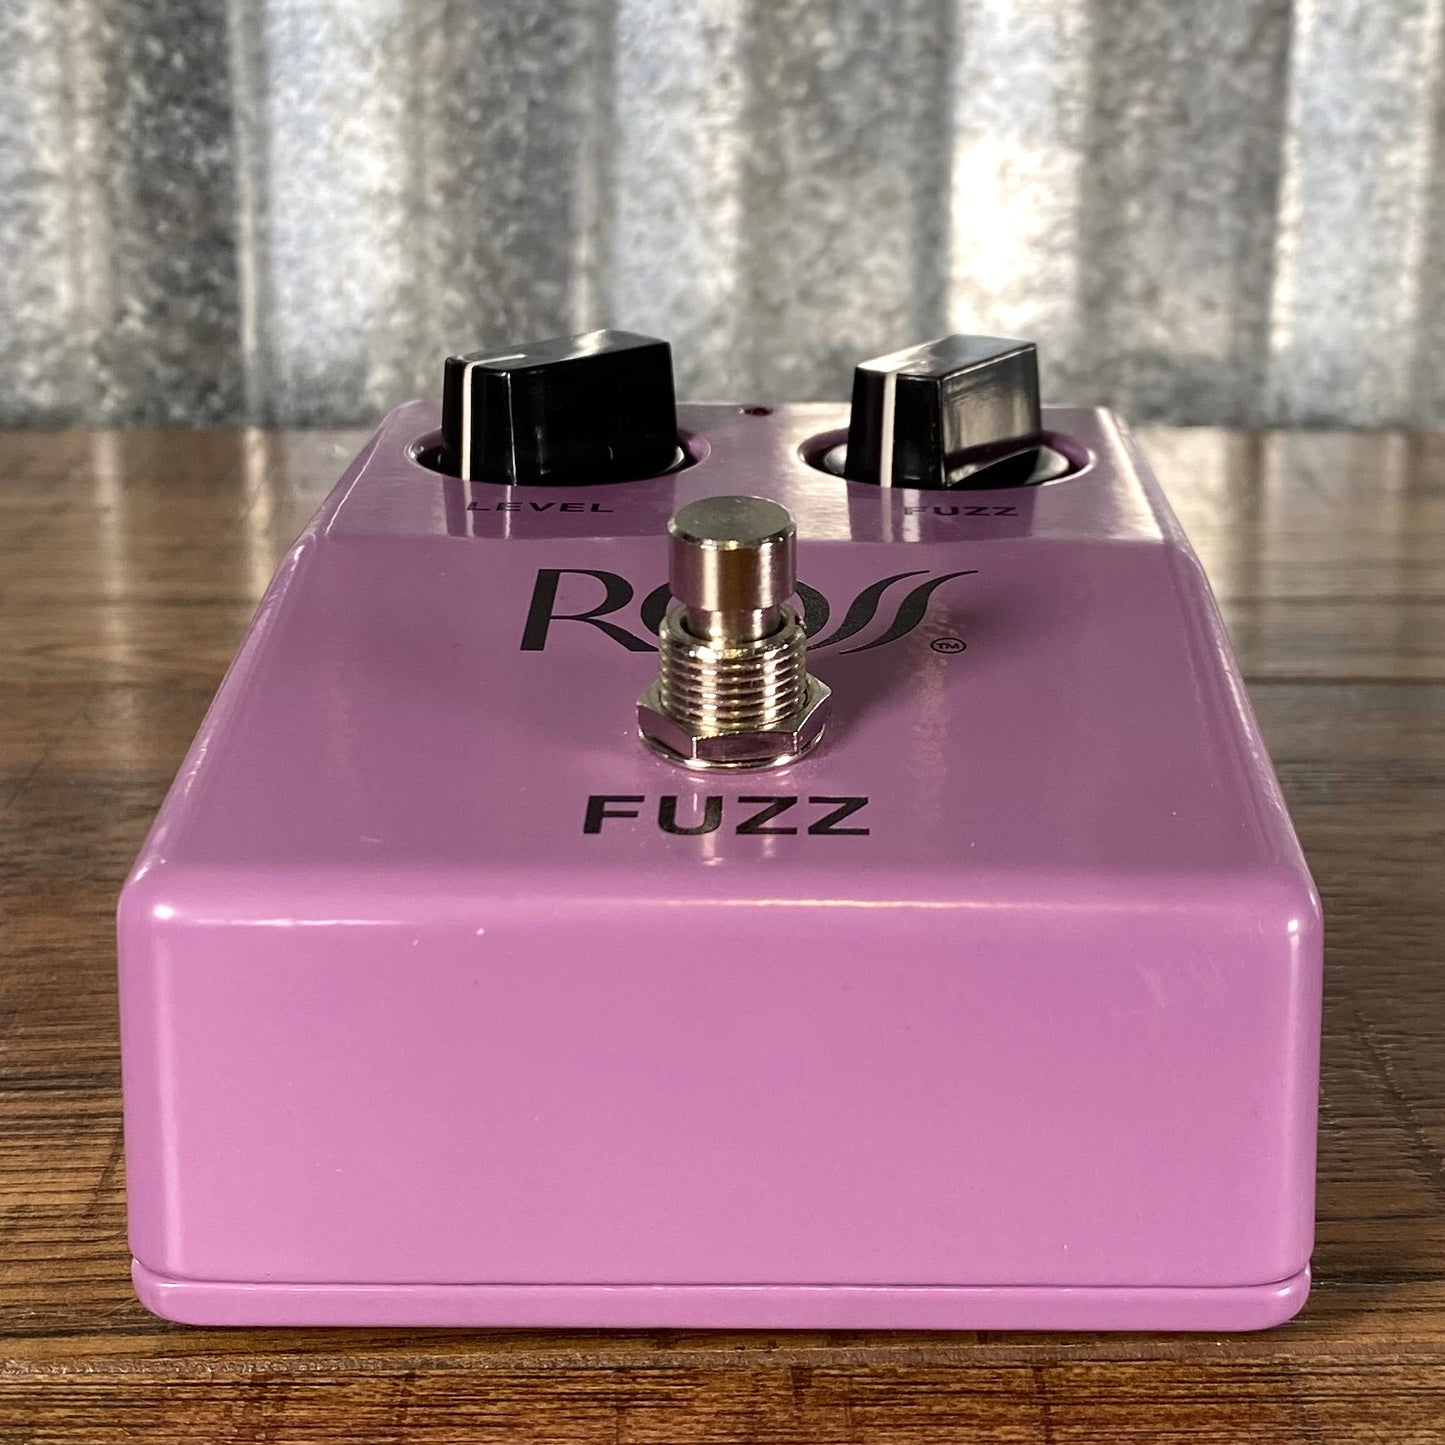 JHS ROSS Fuzz Reissue Guitar Effect Pedal Used